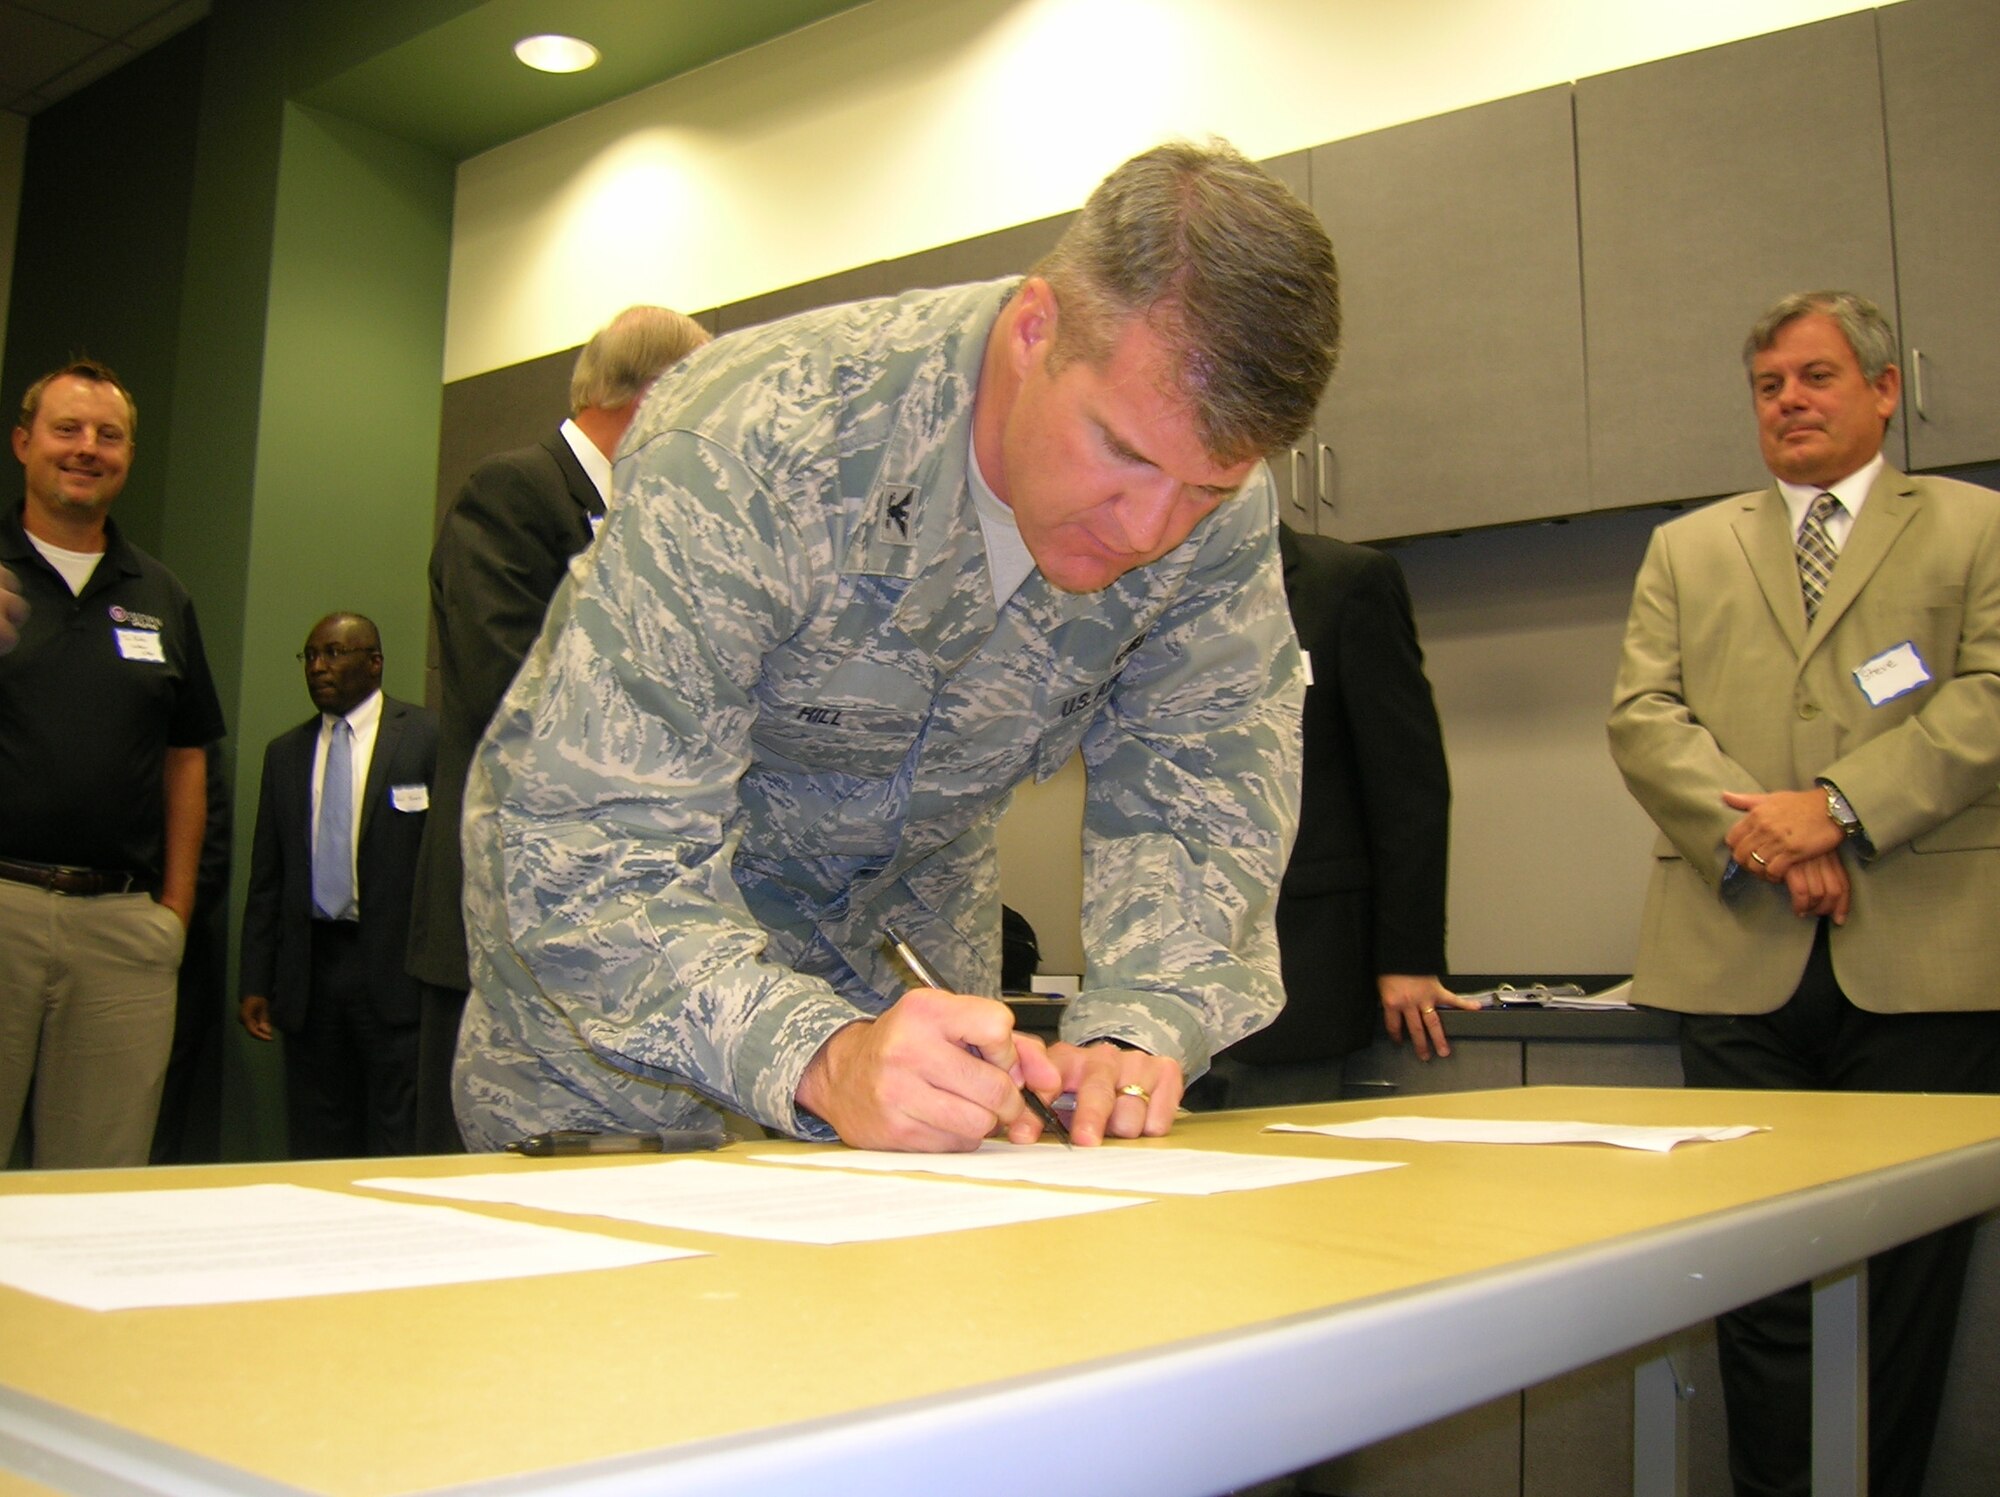 Col. Christopher Hill, Installation commander, signs one of four agreements June 24, 2013, as part of a new community partnership program. The program, called the Air Force Community Partnership Initiative, was created to explore cost-saving opportunities through partnerships and shared services with local communities and the private sector. (U.S. Air Force photo by Roland Leach)
